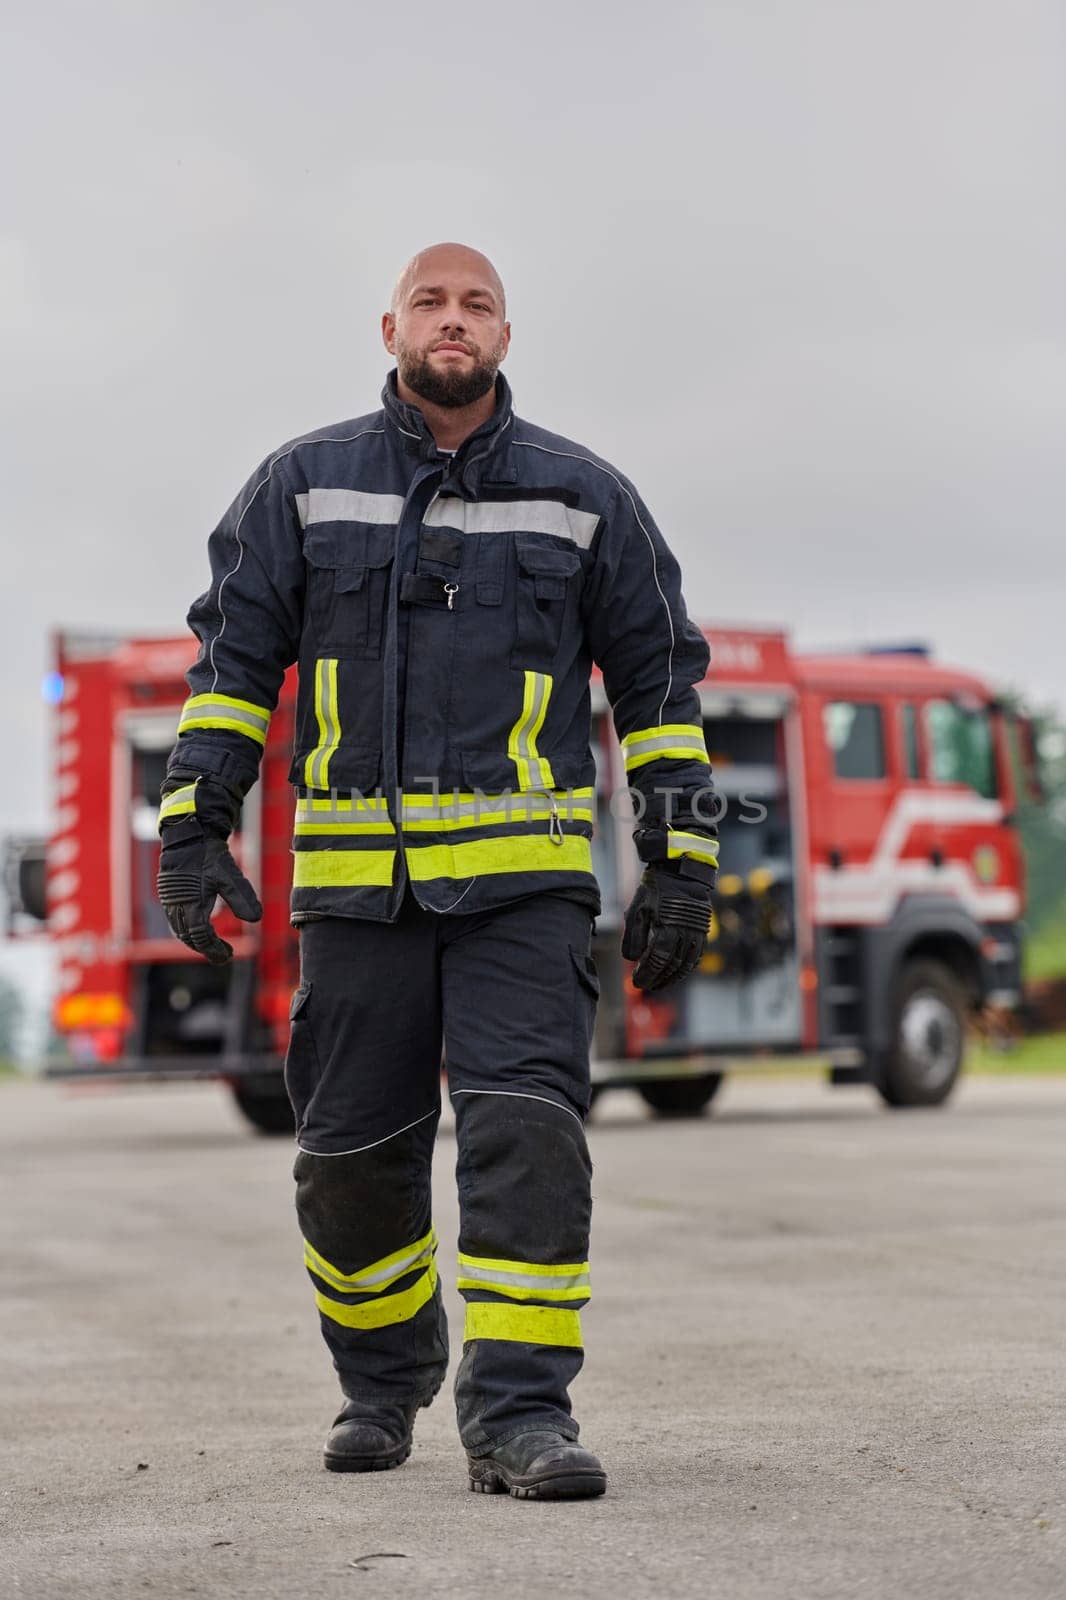 A symbolically brave firefighter strides forward with unwavering courage, epitomizing dedication and leadership, while behind him, a modern firetruck stands ready for firefighting actions, capturing the essence of heroism and preparedness in the face of emergency.